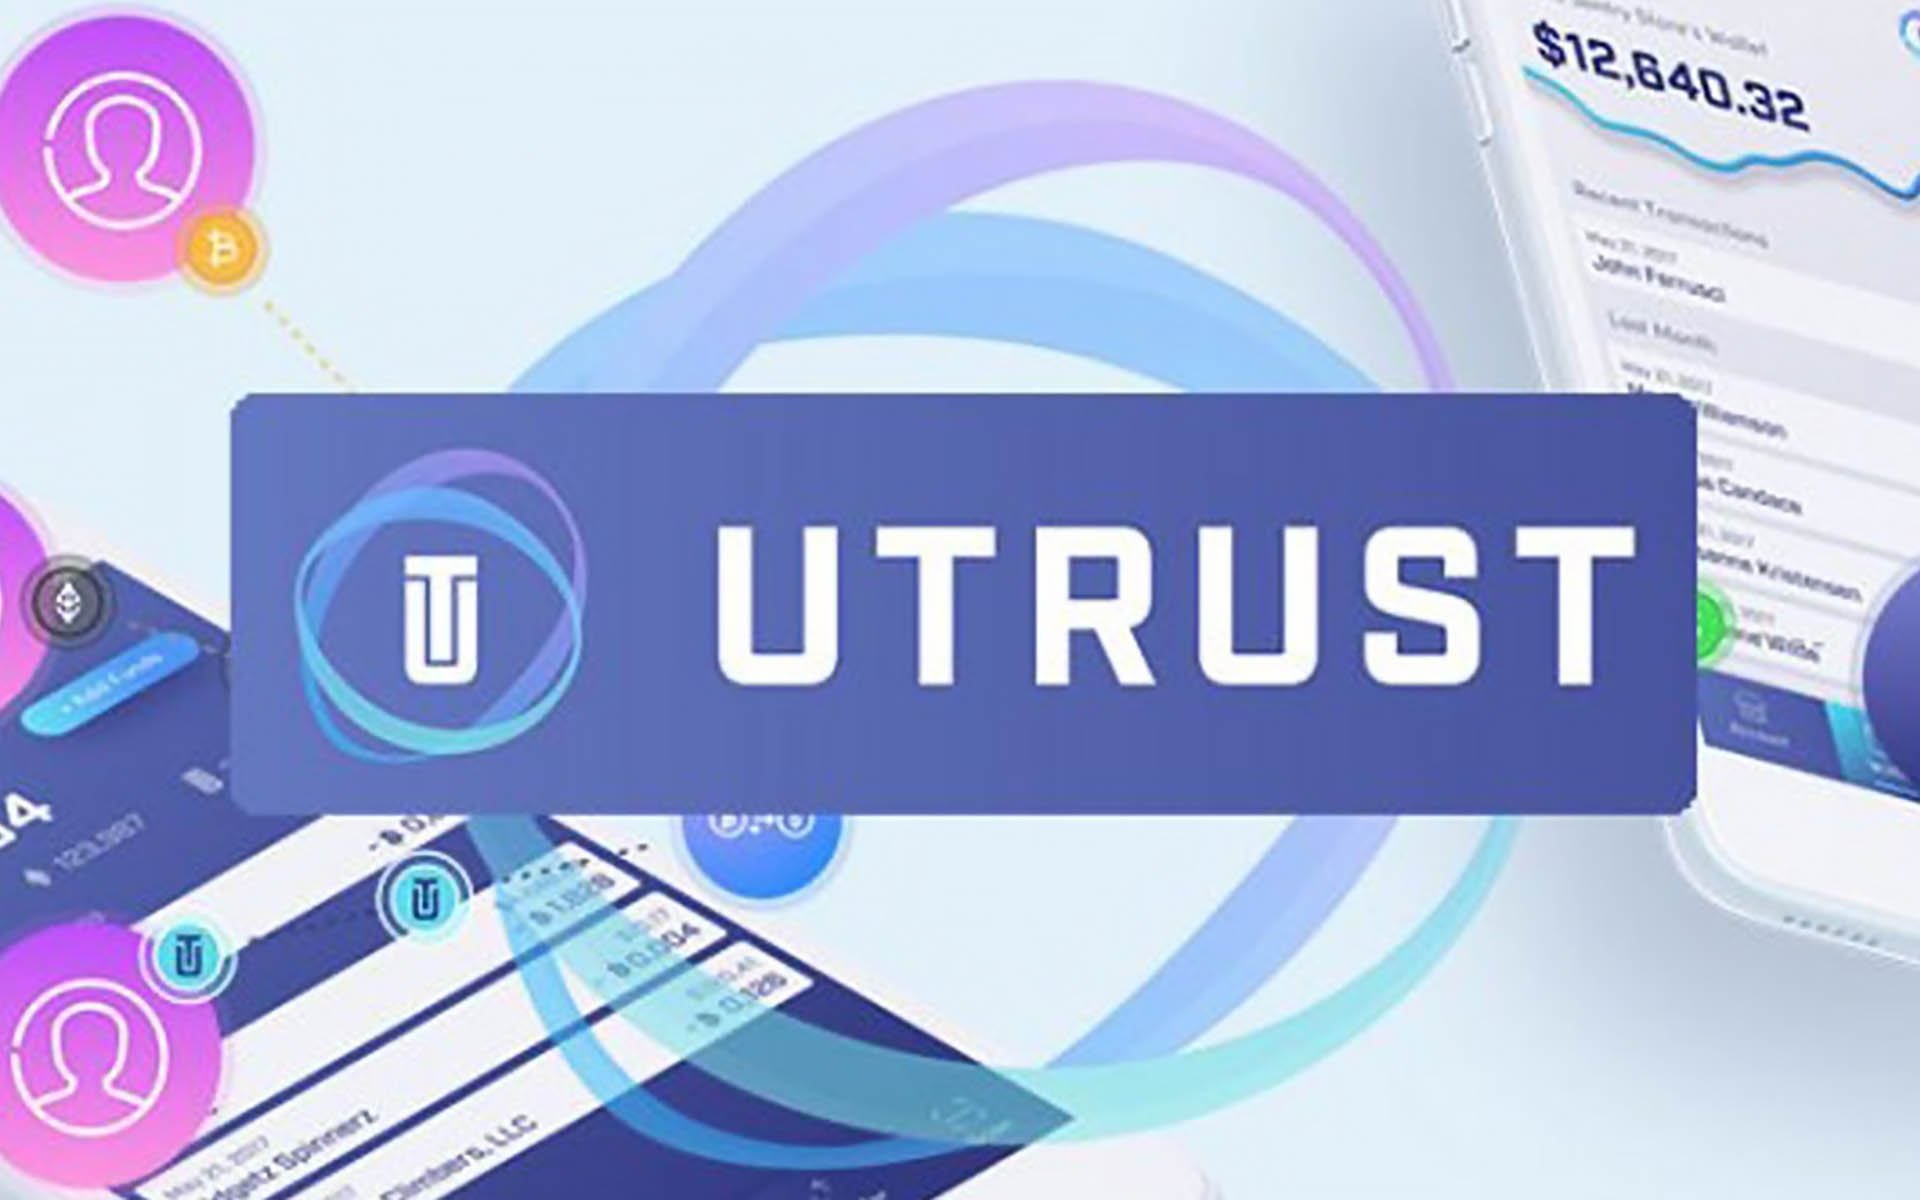 UTRUST are Promoting a Cryptocurrency Payment Solution to 2.5 Billion 'Unbanked' People, Announcing ICO Details